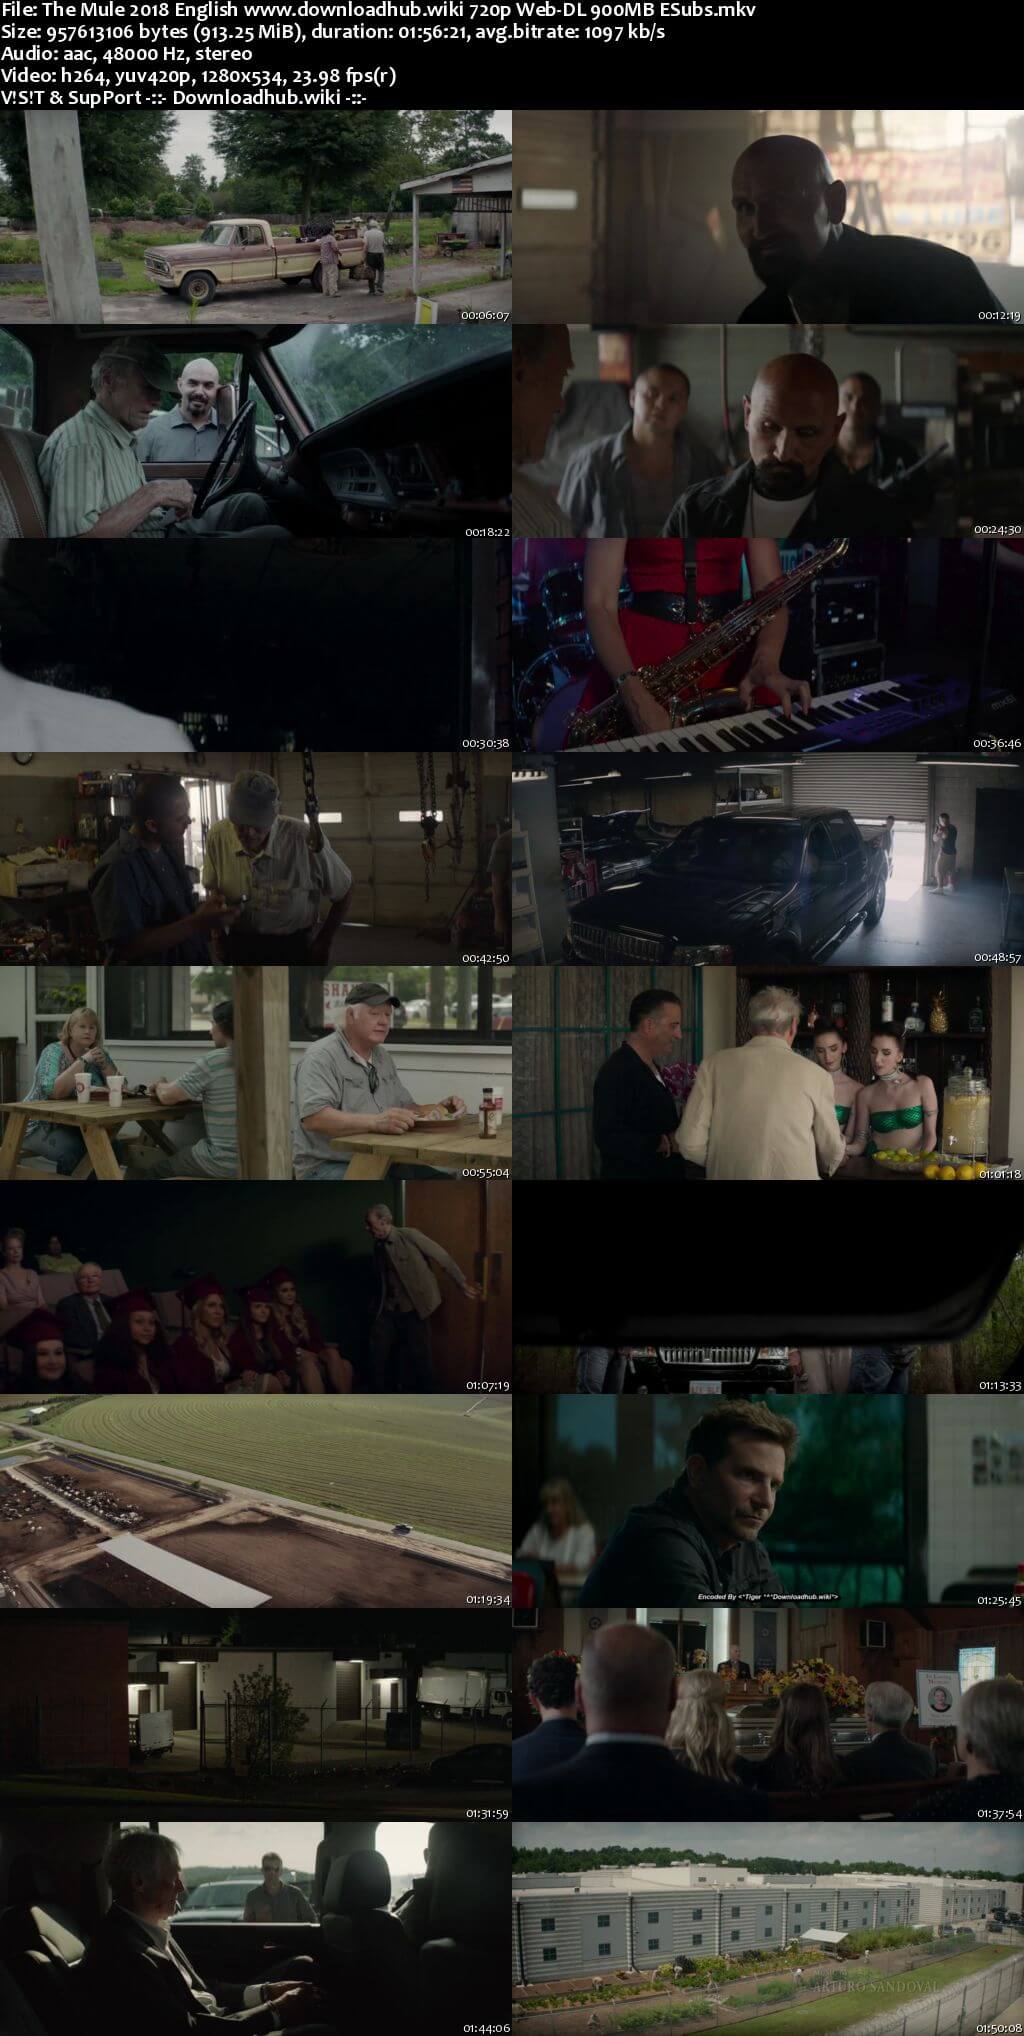 The Mule 2018 English 720p Web-DL 900MB ESubs